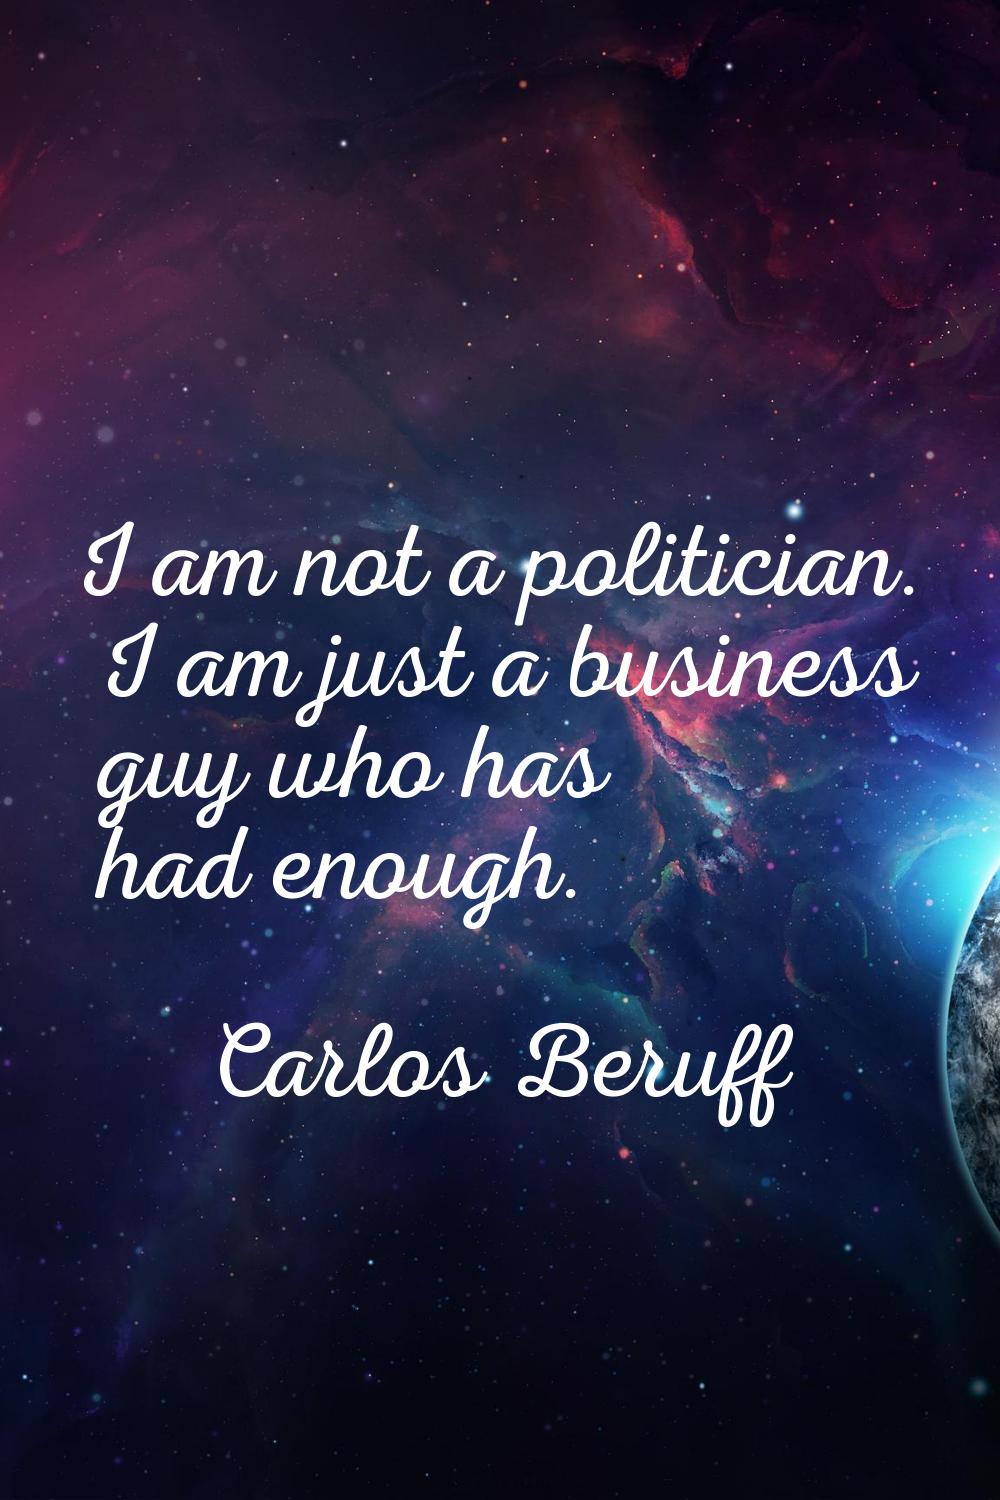 I am not a politician. I am just a business guy who has had enough.